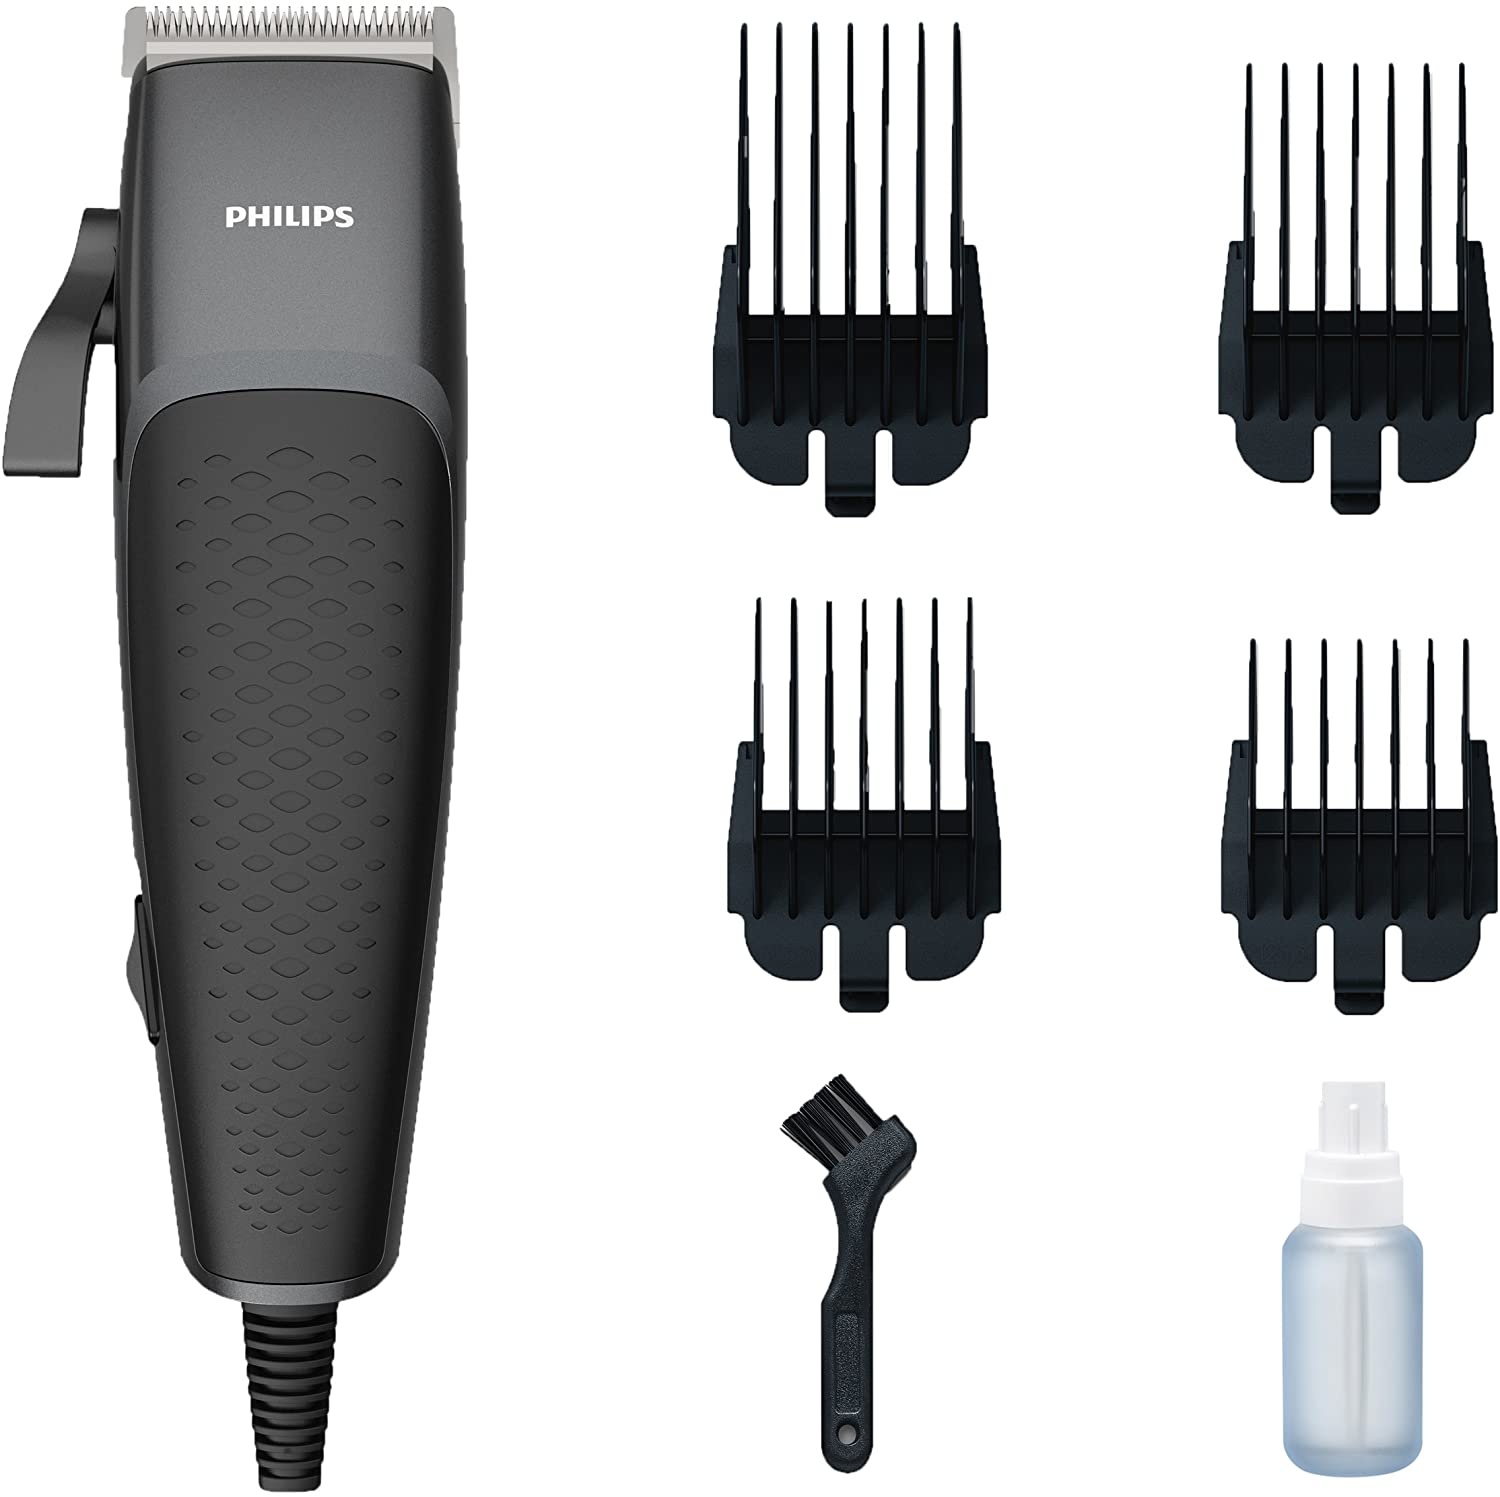 Philips HC3100 Hairclipper Series 3000 Home Clipper Copper Motor Coil, Durable, Steel Blades